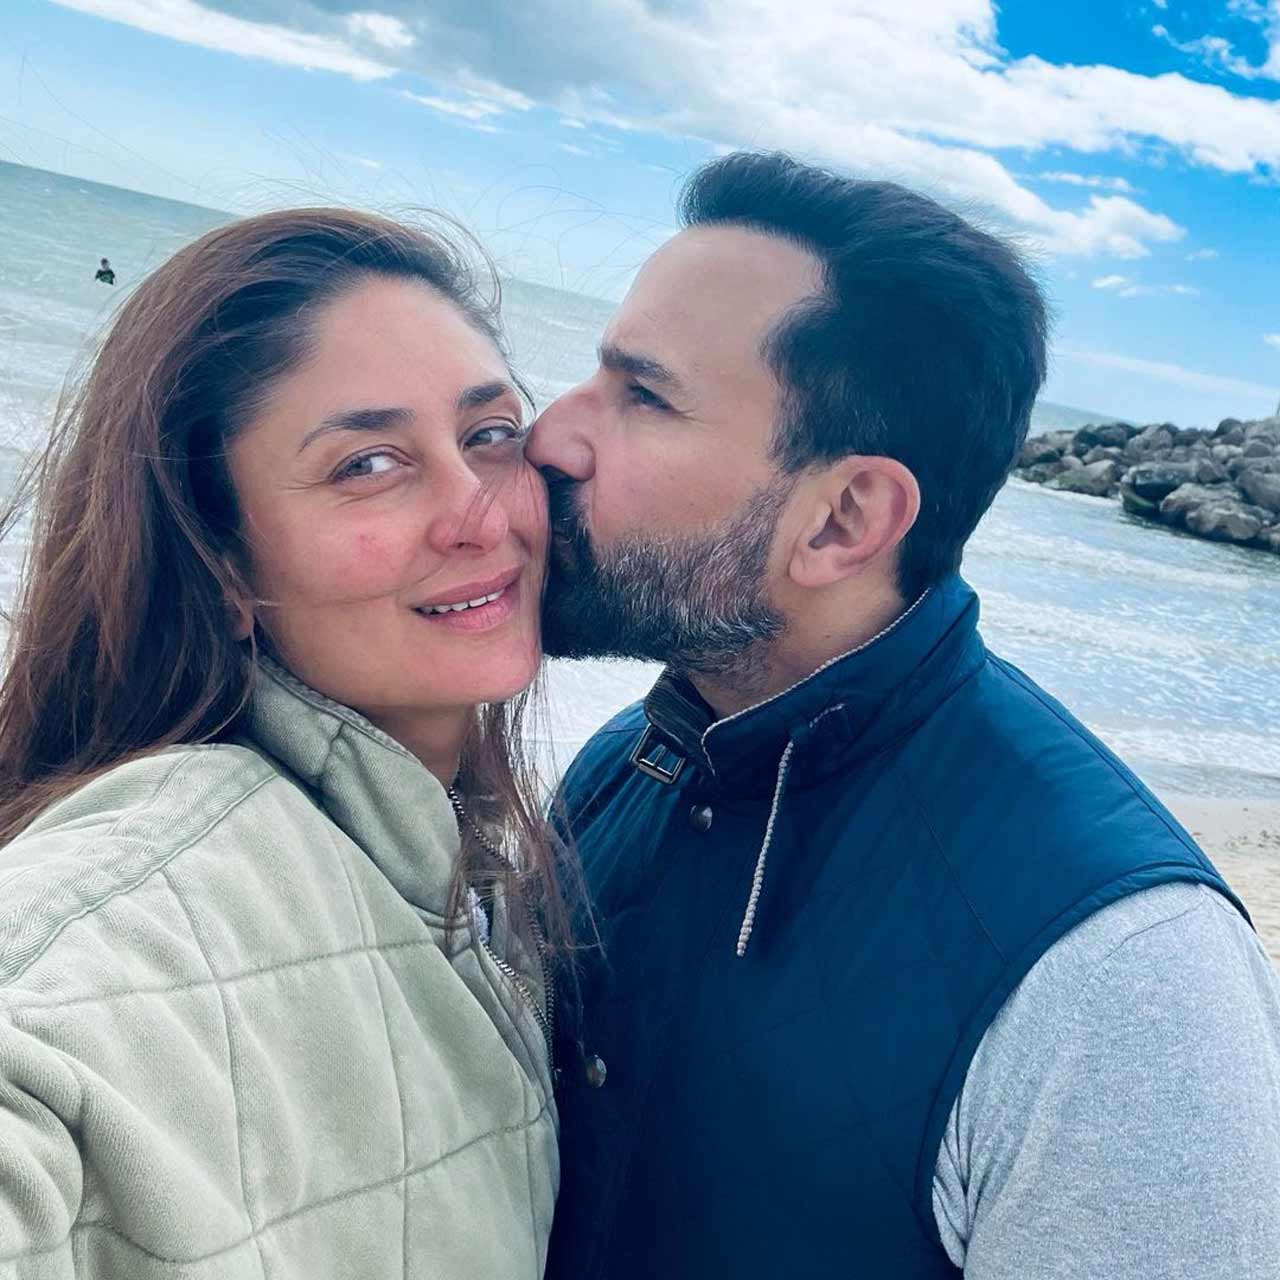 Kareena donned a grey blazer and wore no makeup for their outing. Saif Ali Khan dressed down a grey full-sleeve T-shirt with a blue half jacket. Kareena grinned for the selfie in the first photo, keeping her face close to Saif. In this shot, Saif kissed his wife on the cheek